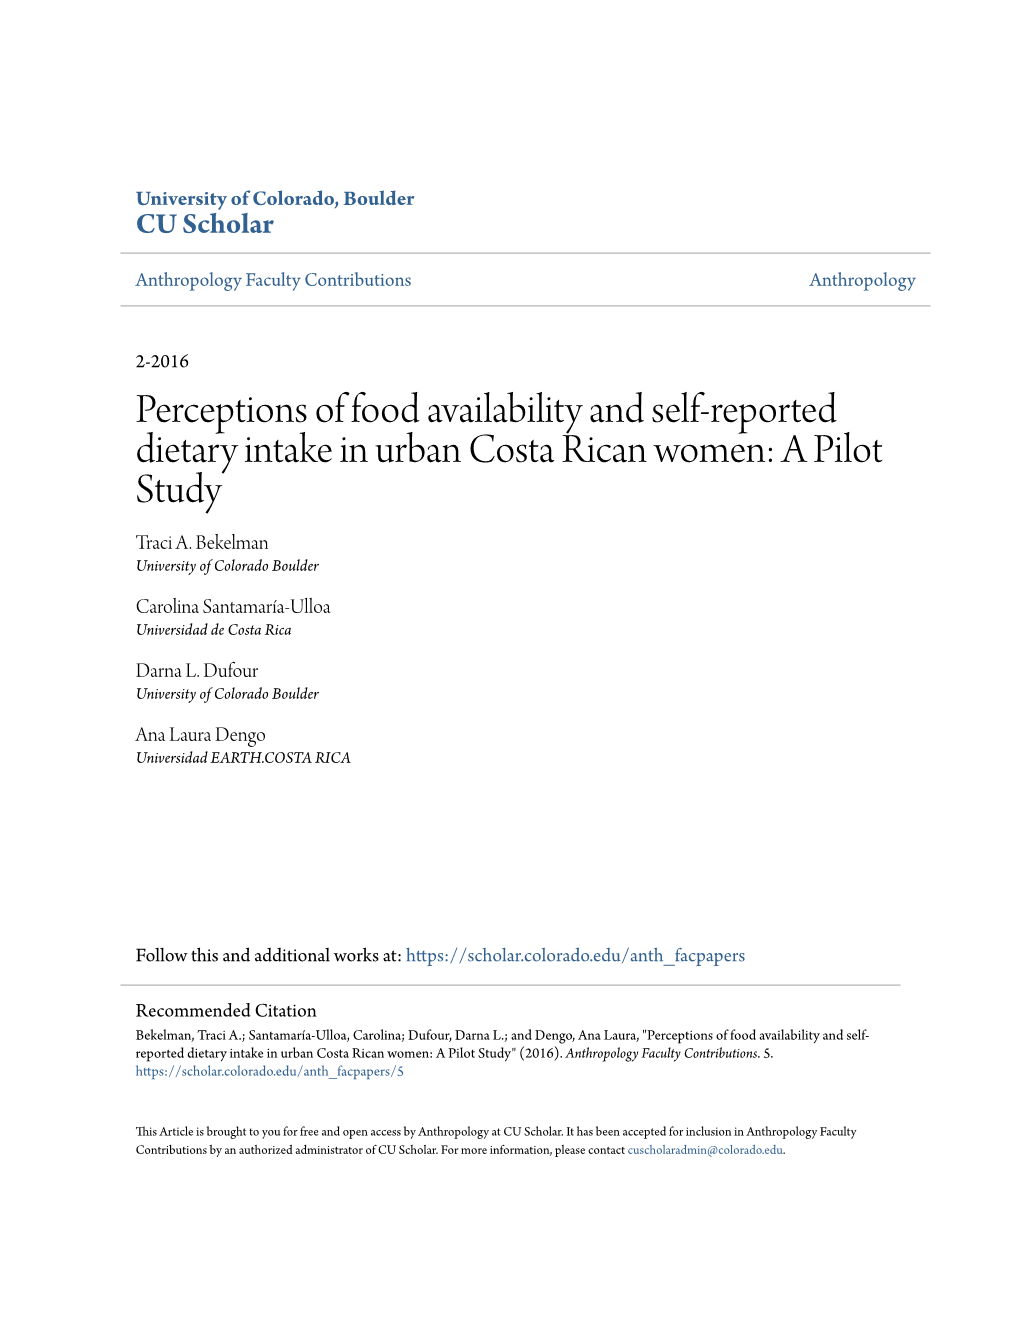 Perceptions of Food Availability and Self-Reported Dietary Intake in Urban Costa Rican Women: a Pilot Study Traci A